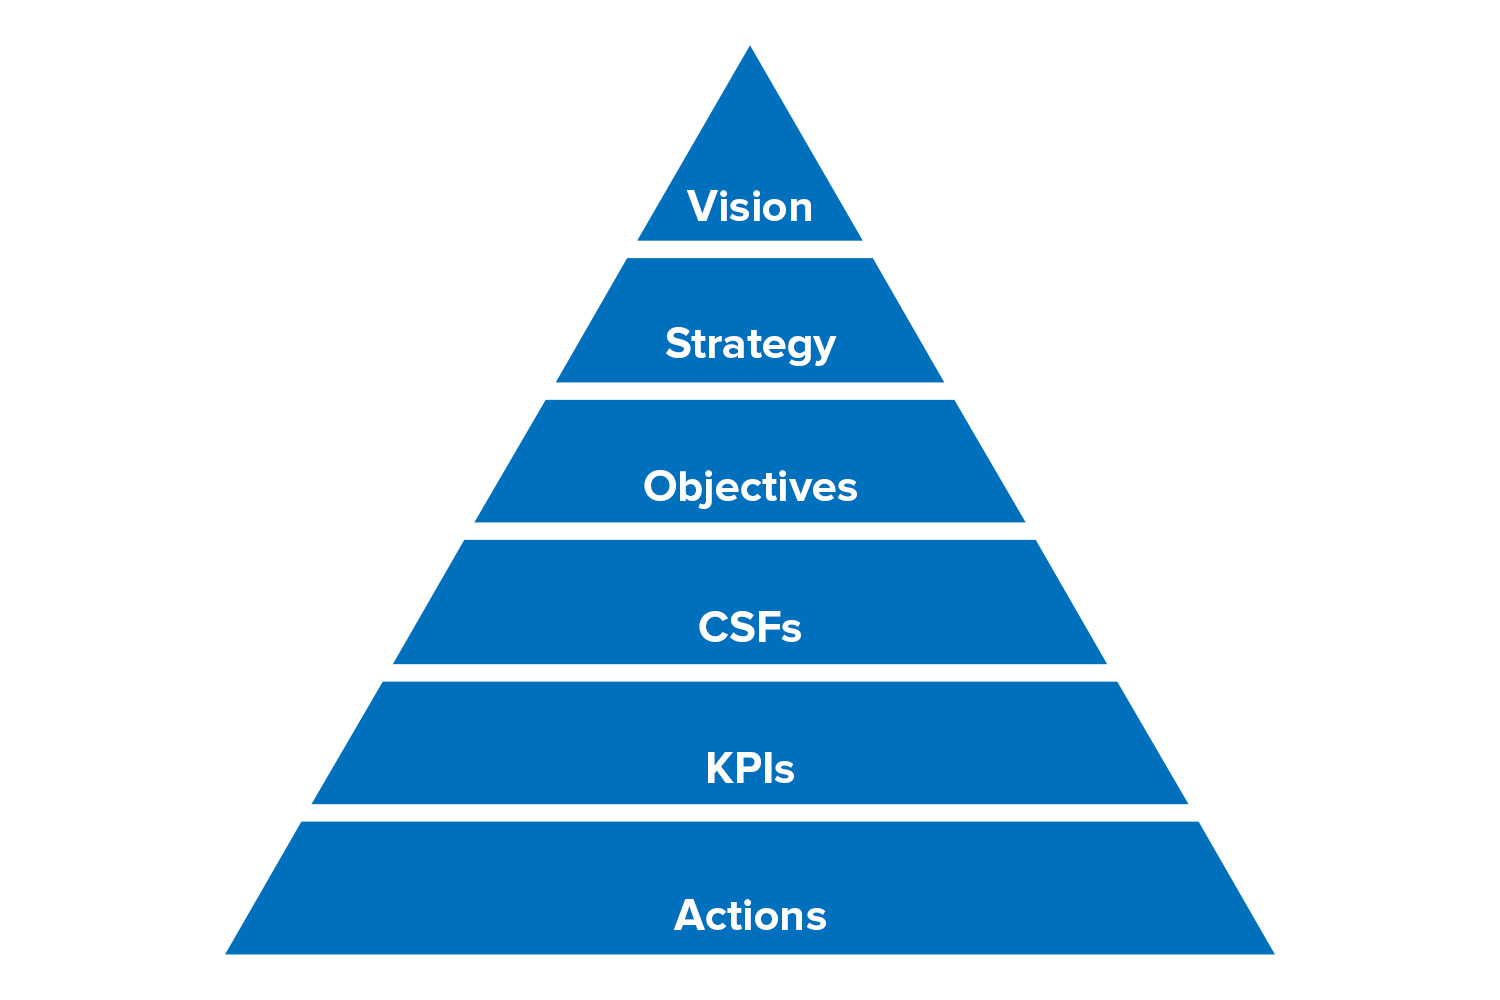 Performance Management and KPIs - From MindTools.com